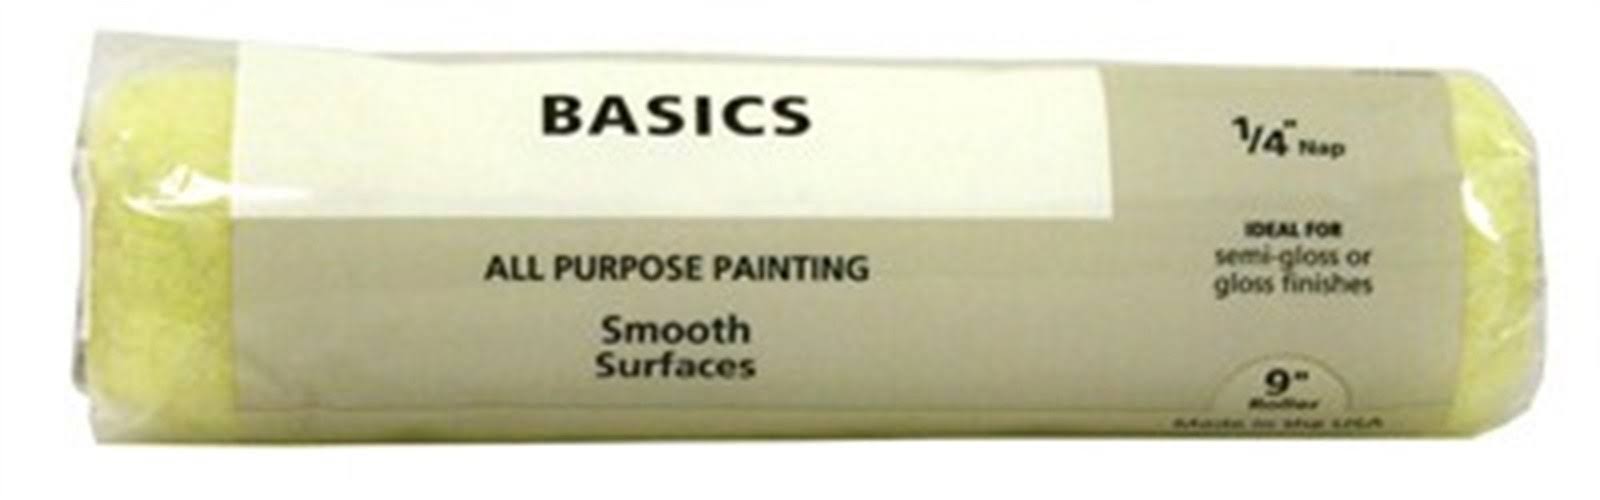 True Value 697886 Master Painter Basics Paint Roller Covers - for Smooth Surfaces, 1/4" Nap, 3pk